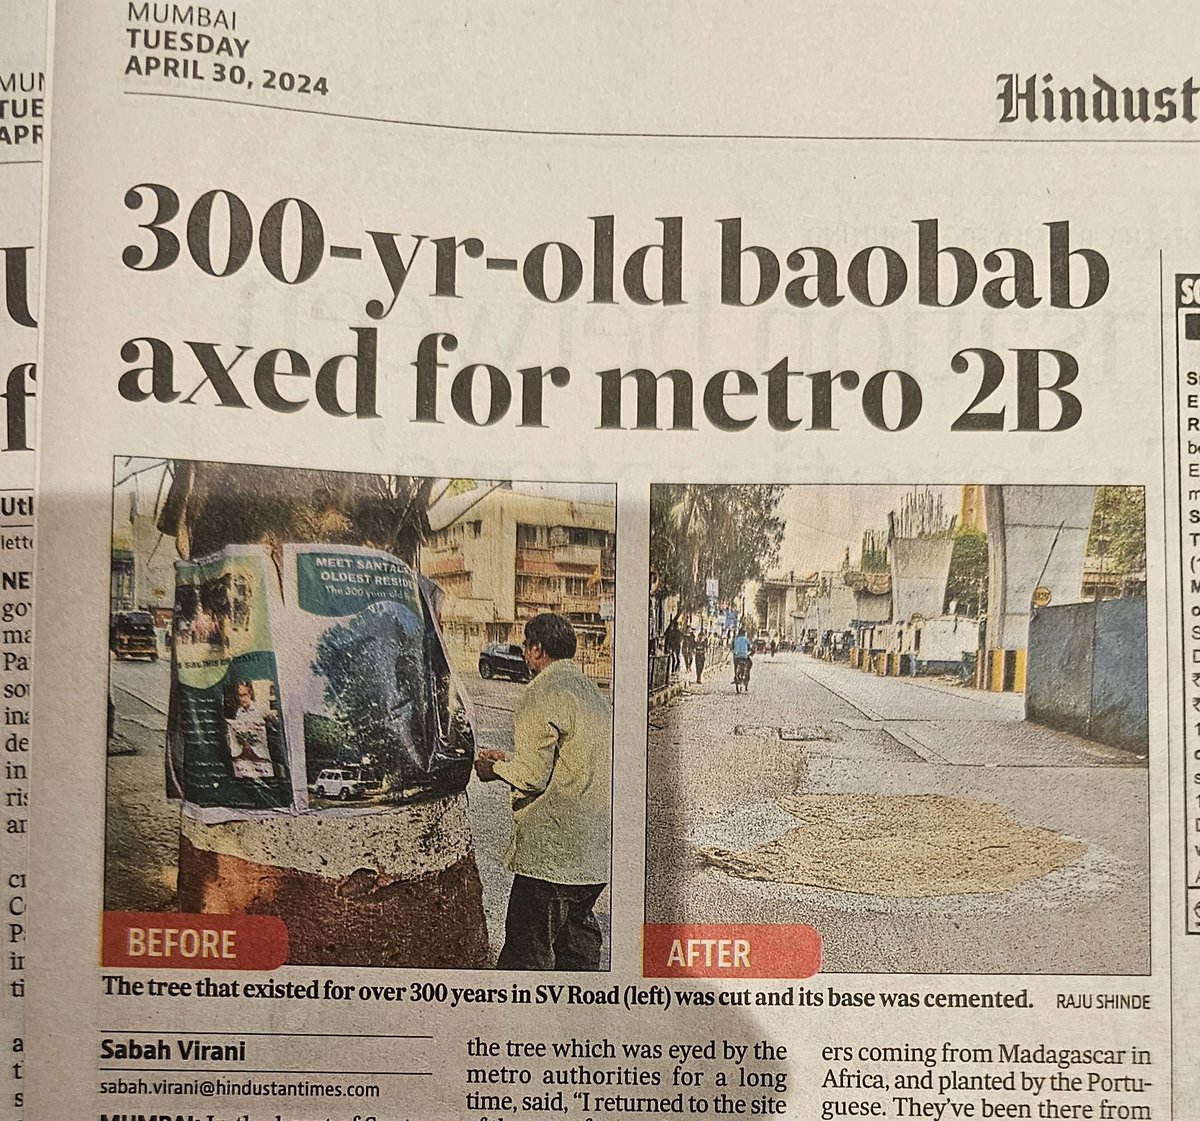 A family elder has been ruthlessly hacked to death! All in the name of 'development'. Shows the low level of thinking by @mybmc and @MMRDAOfficial It's a criminal act. #baobabmurder